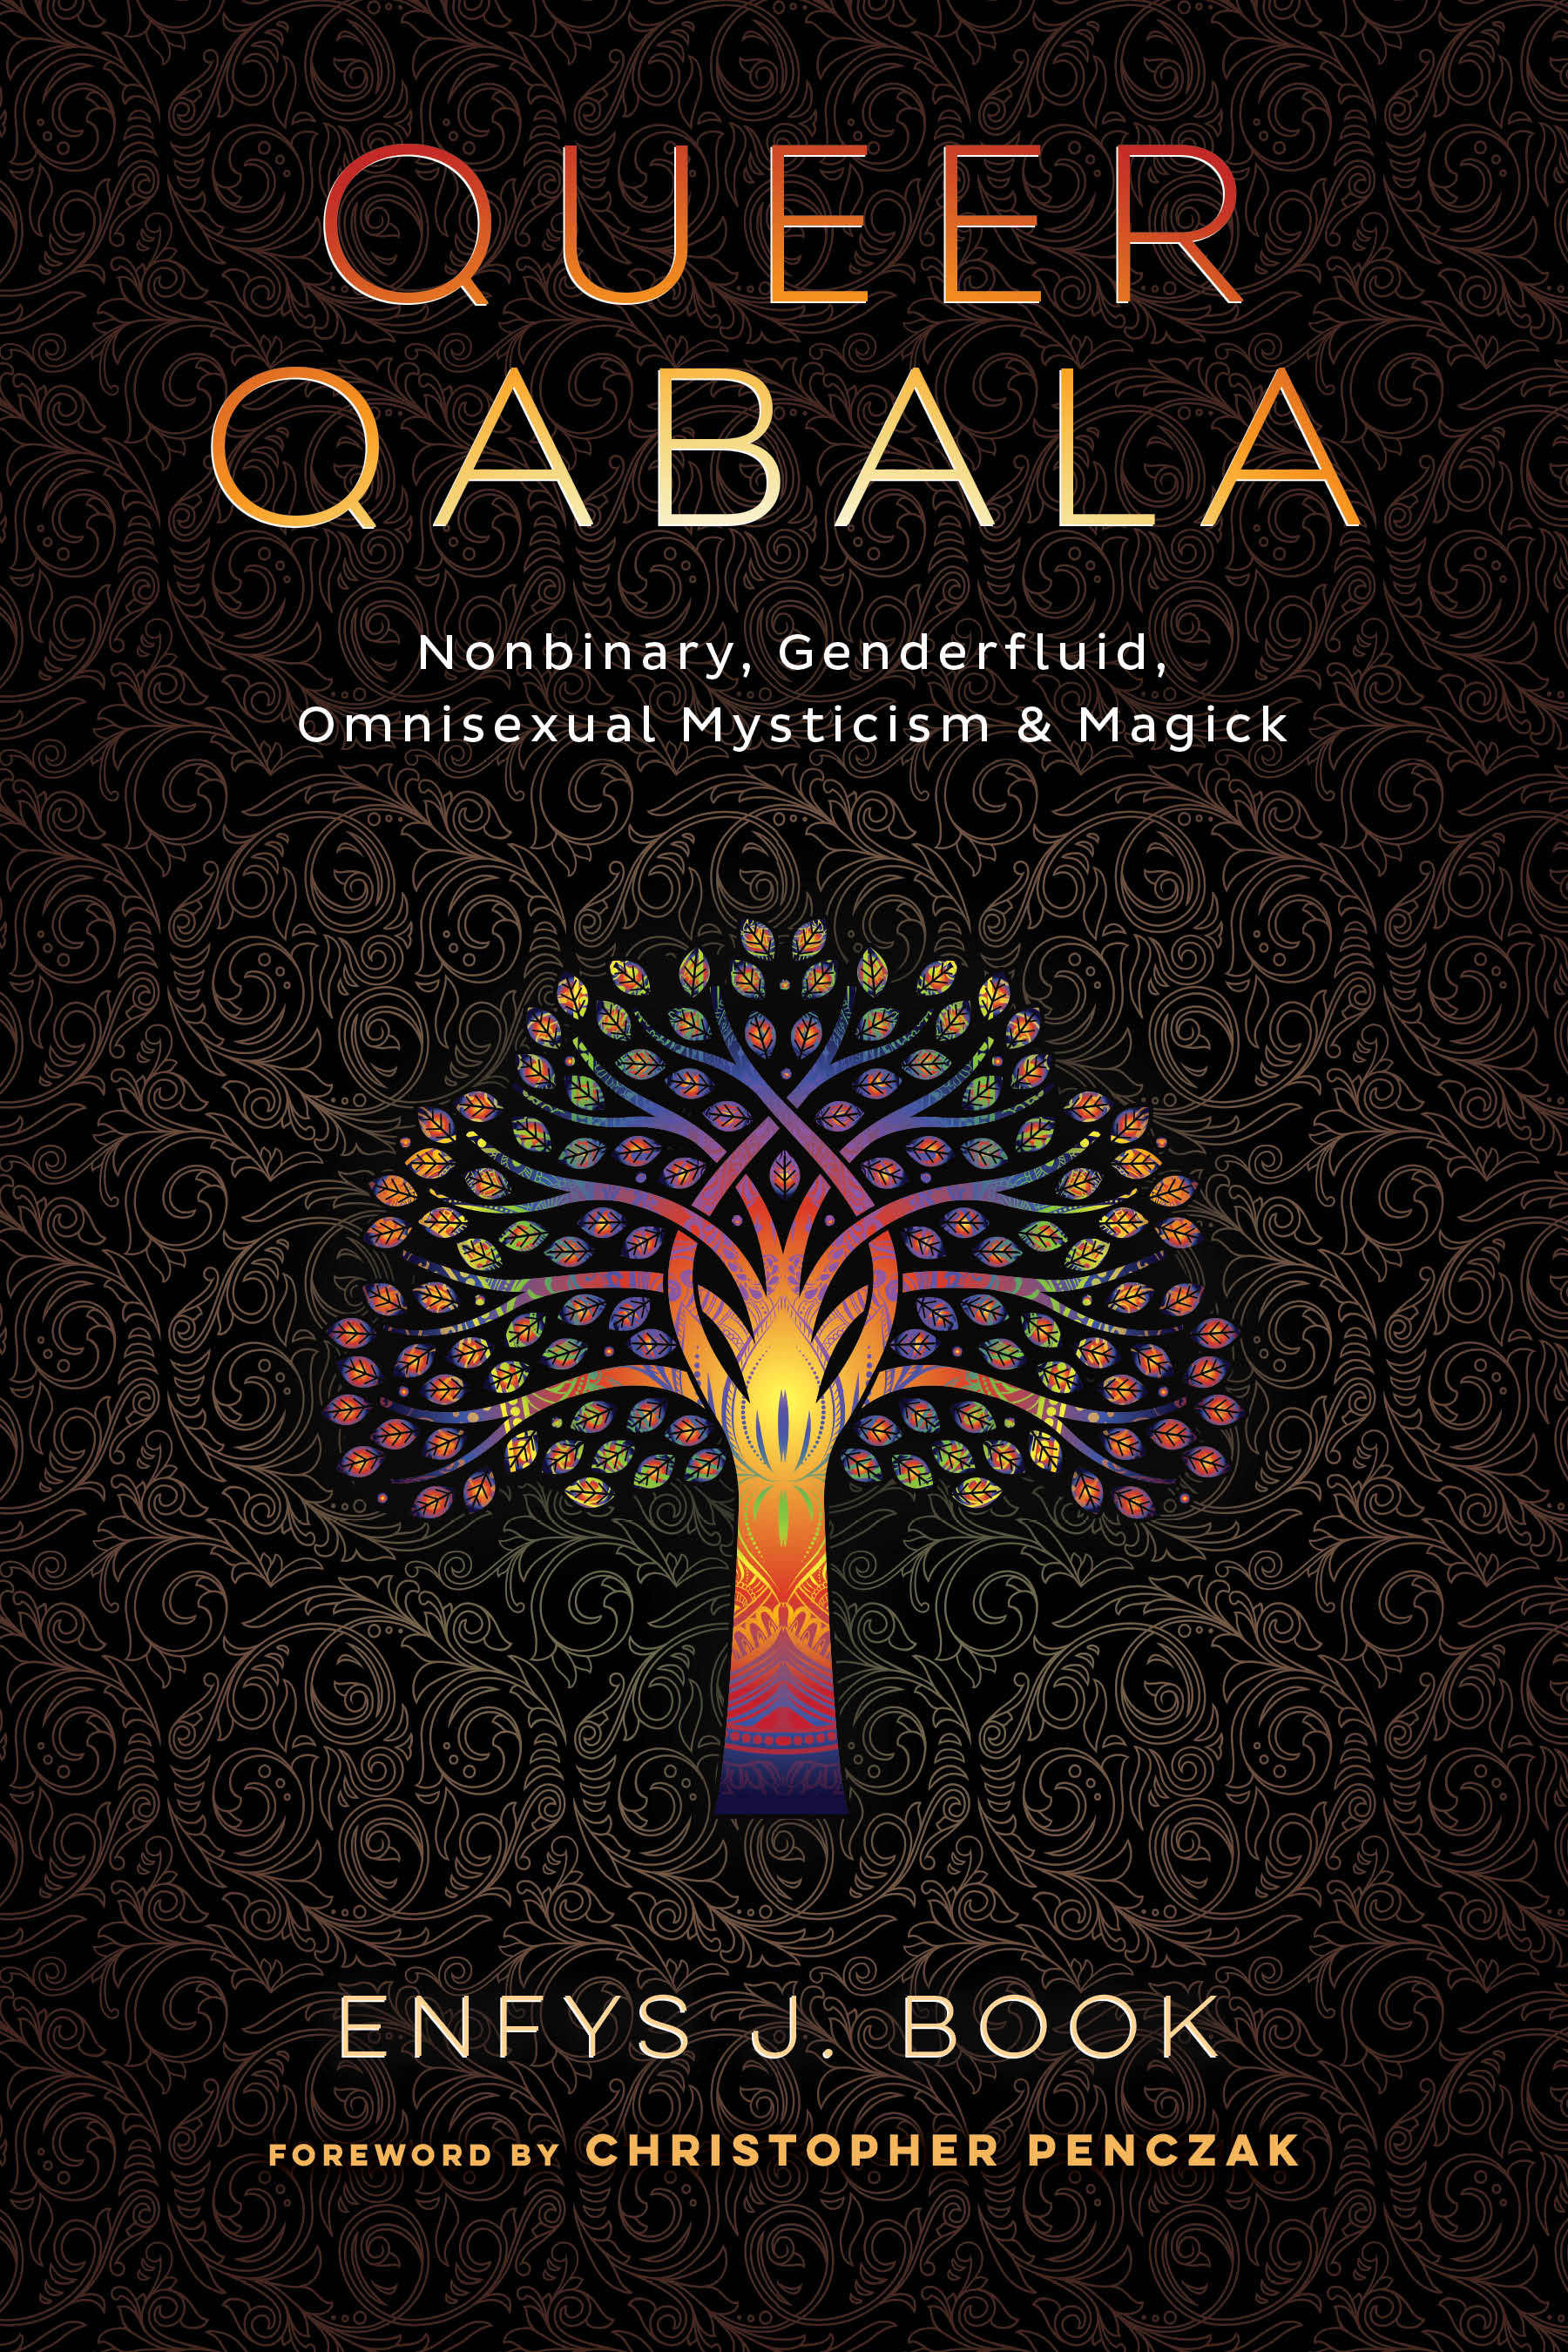 Cover of the book "Queer Qabala: Nonbinary, Genderfluid, Omnisexual Mysticism & Magick" by Enfys J. Book, Foreword by Christopher Penczak. The cover art features an artistically-stylized rainbow-gradient tree.